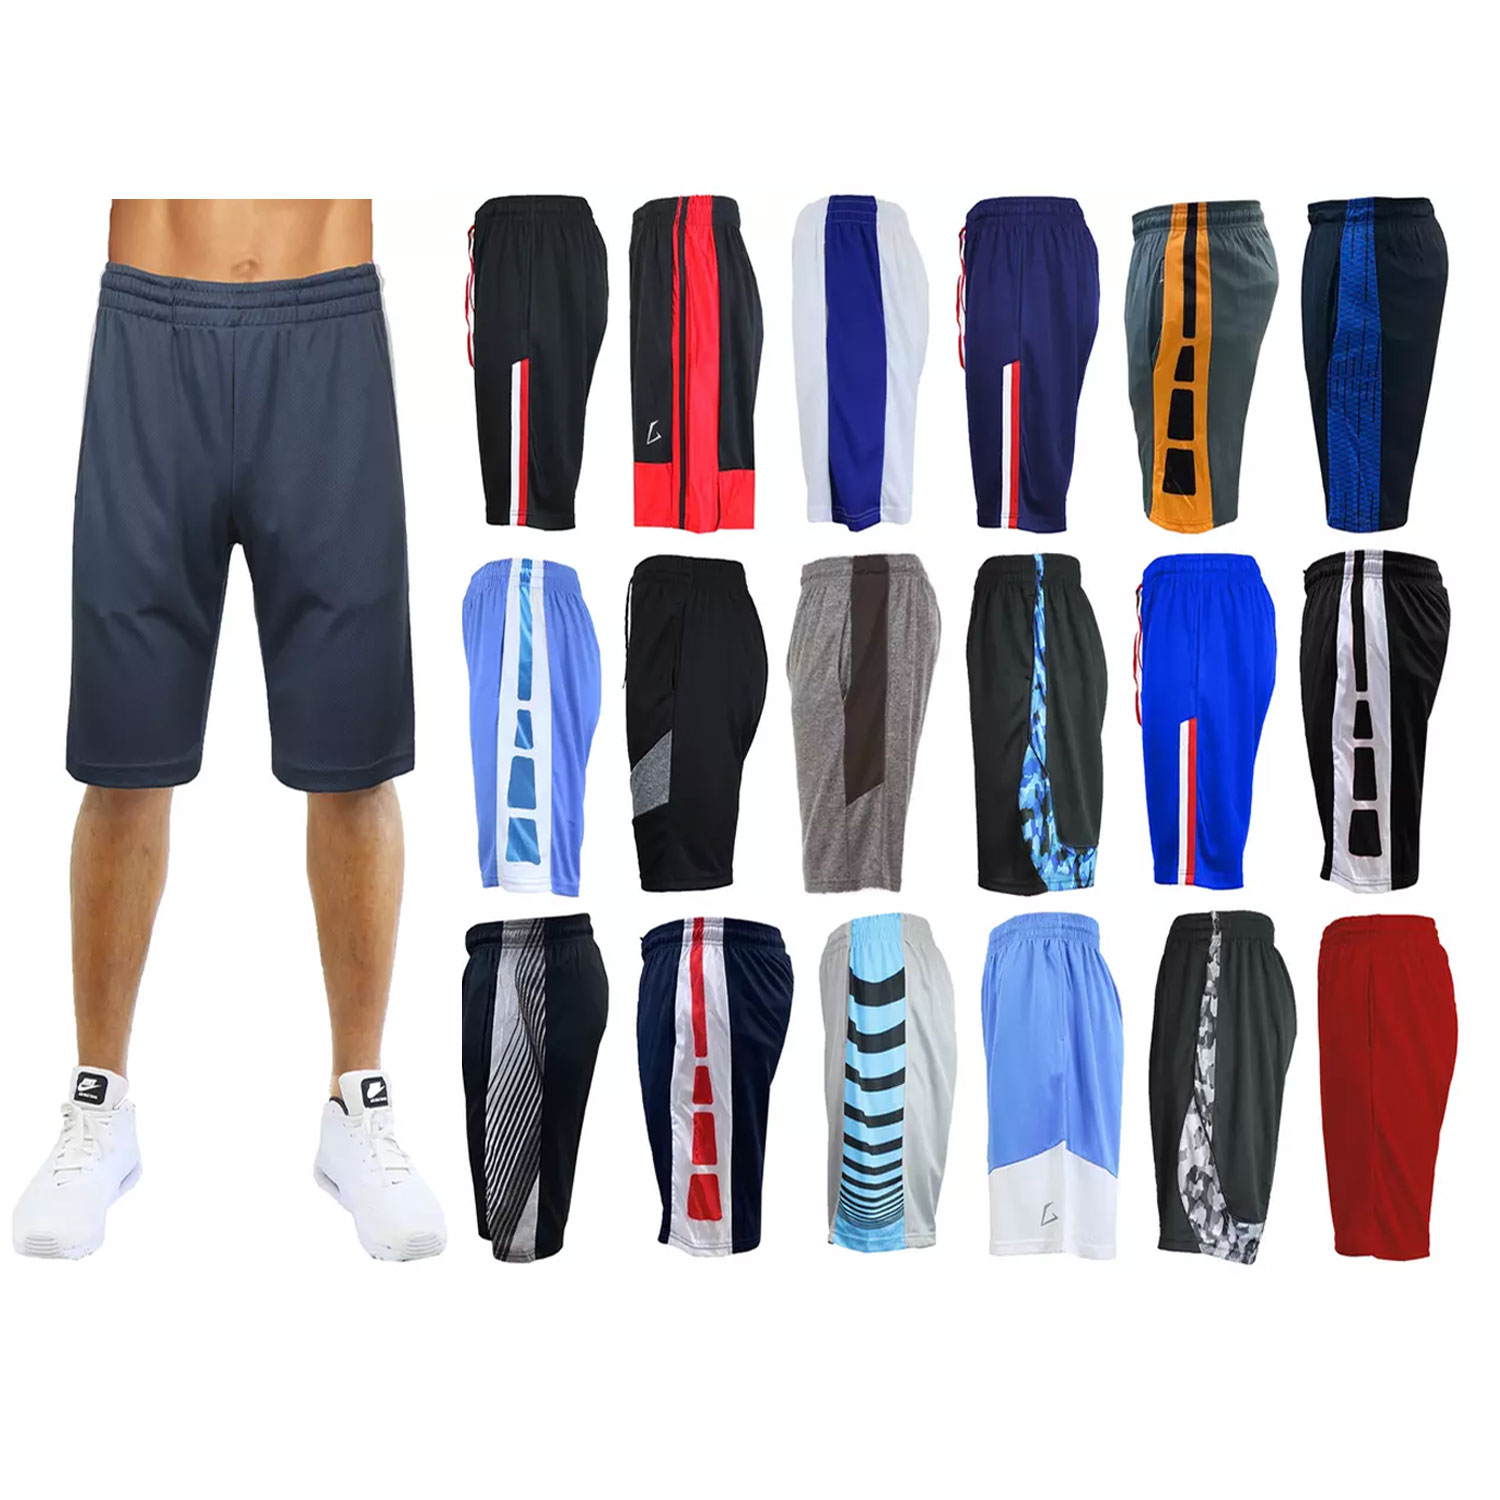 4 Pack Men's Moisture Wicking Assorted Performance Active Shorts